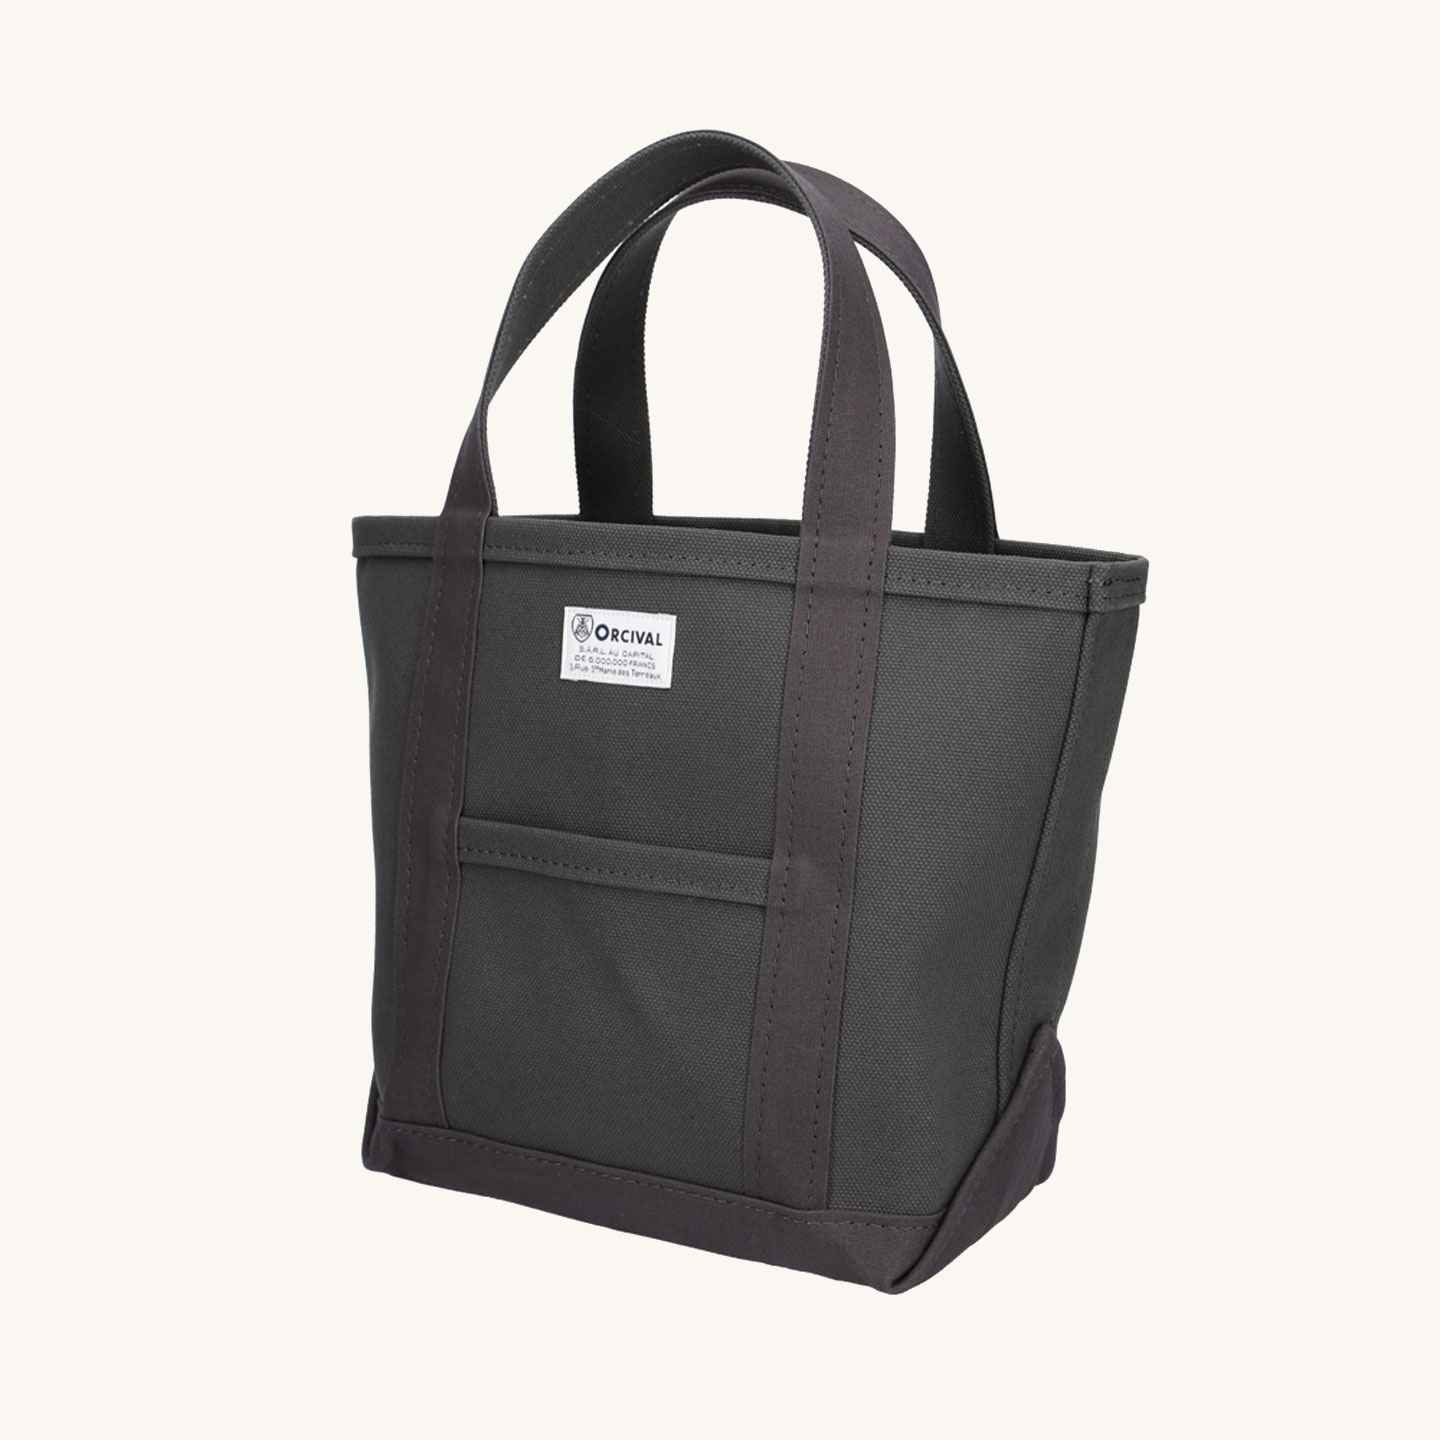 The charcoal tote-bag by Orcival in small size Orcival